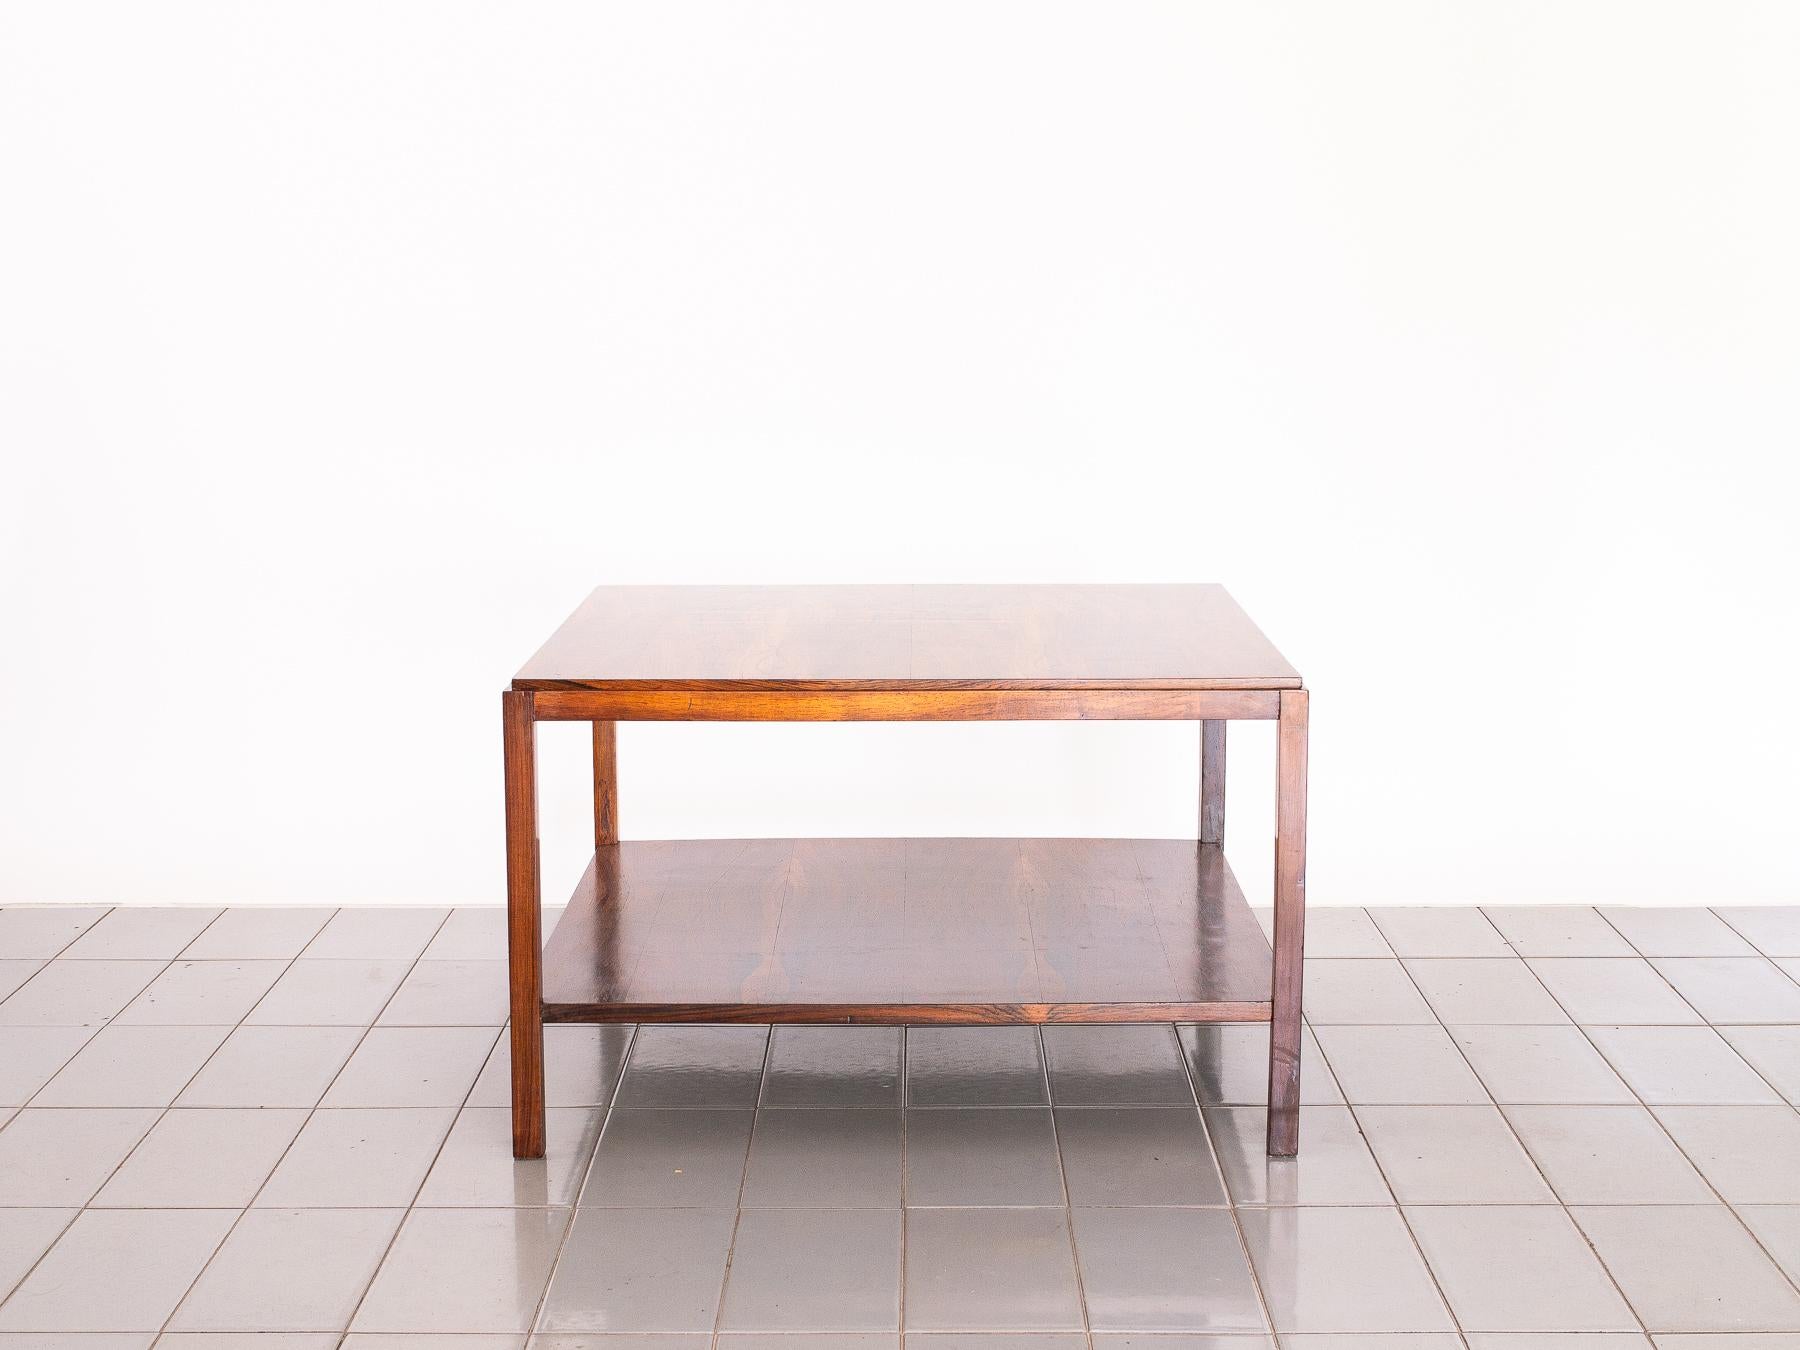 Amazing grain on this large side table designed by Sergio Rodrigues and retailed by Móveis Ambiente in São Paulo, late 1950s. The large square format with two tops makes it a perfect table for books and big table lamps.

